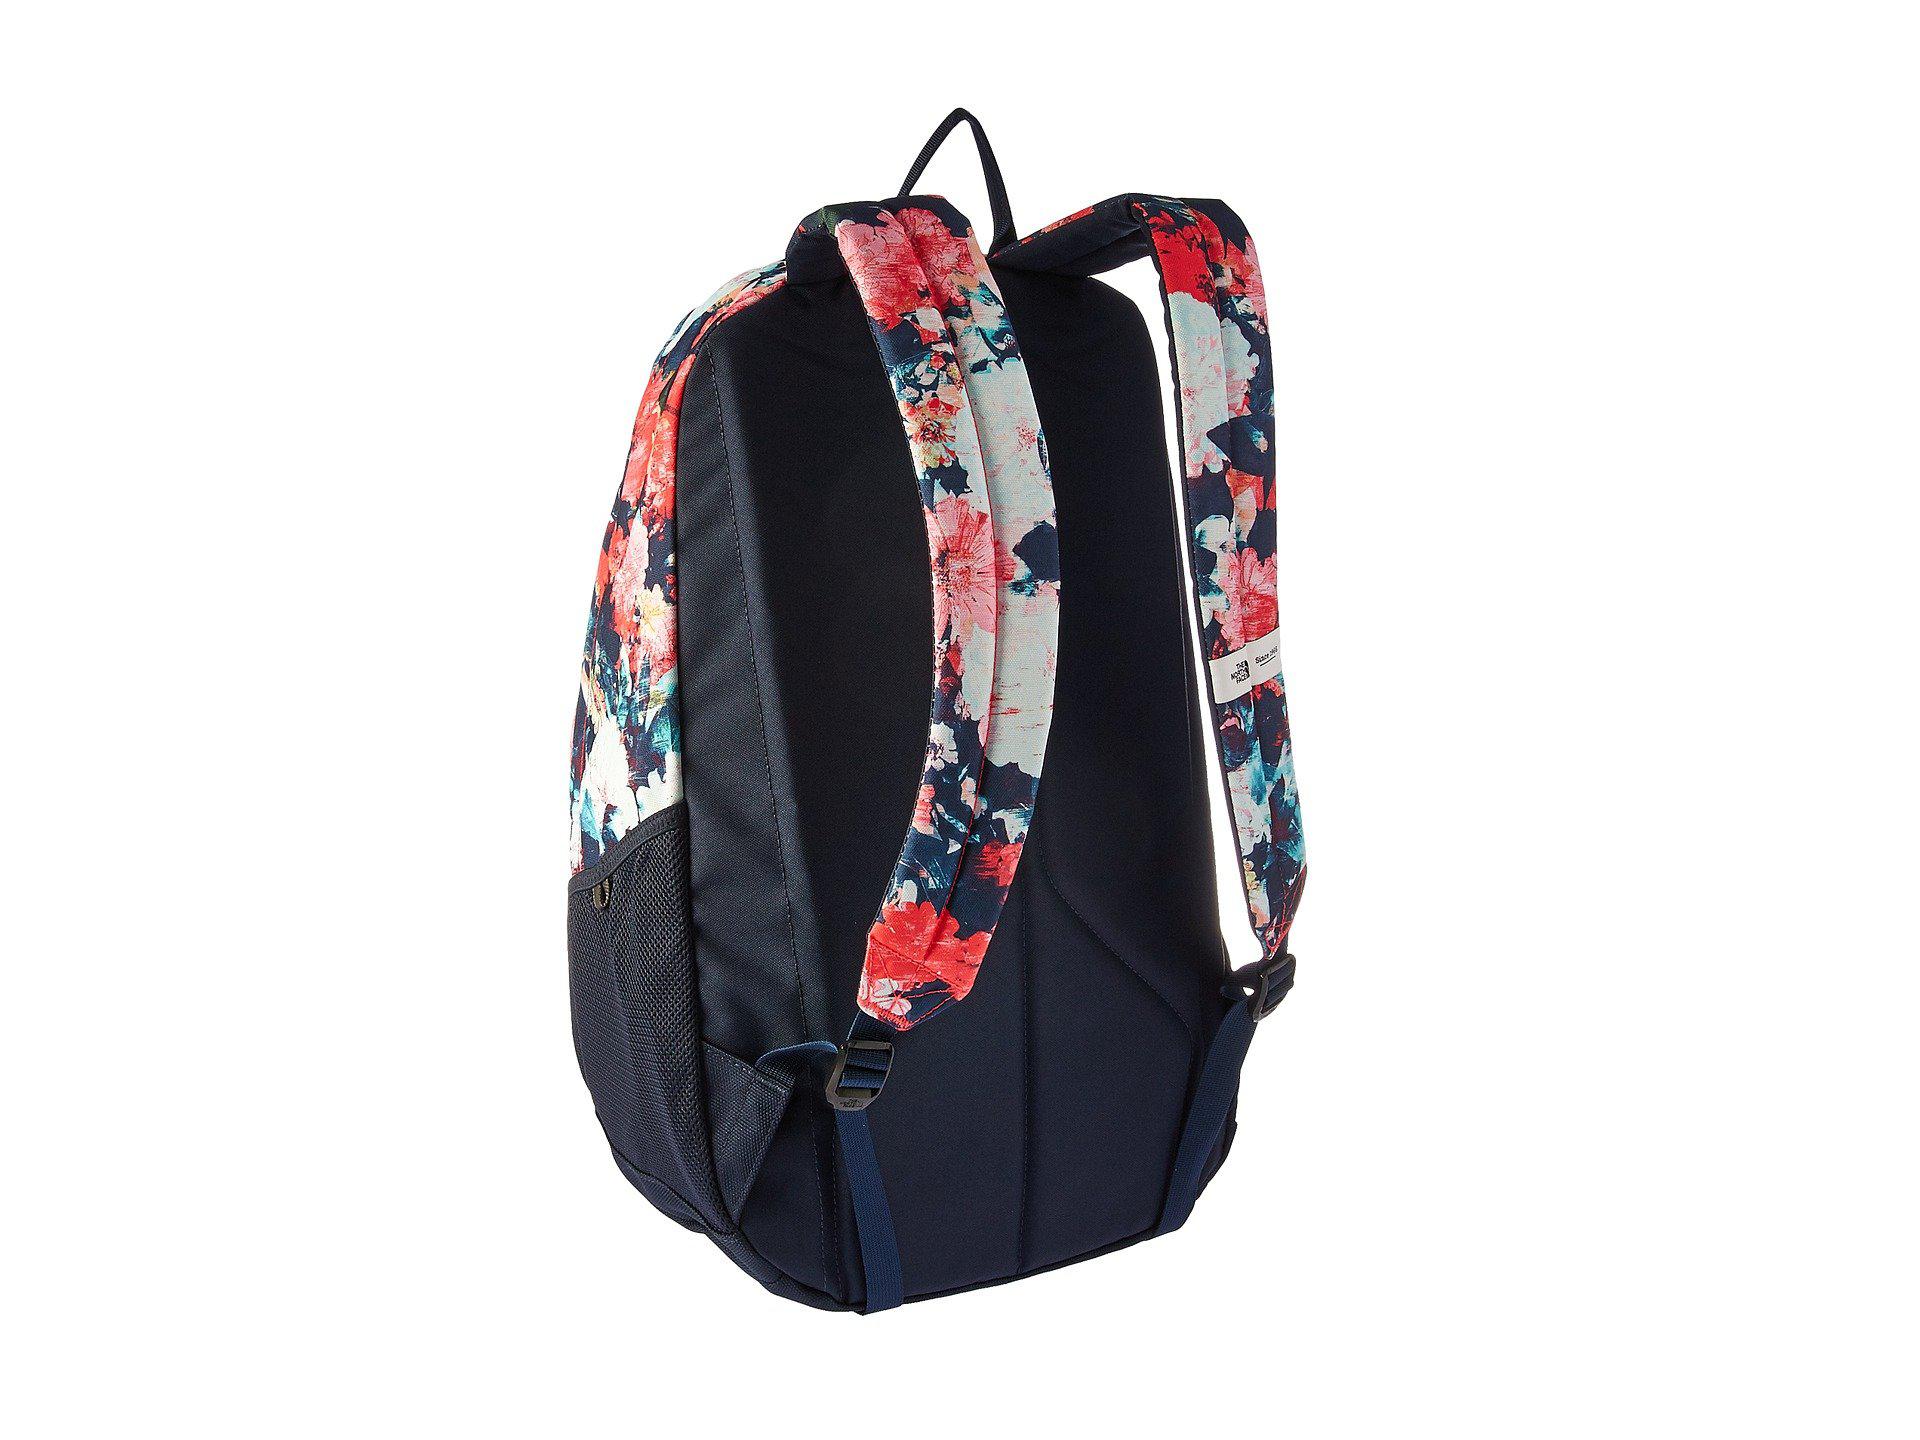 north face wise guy backpack floral